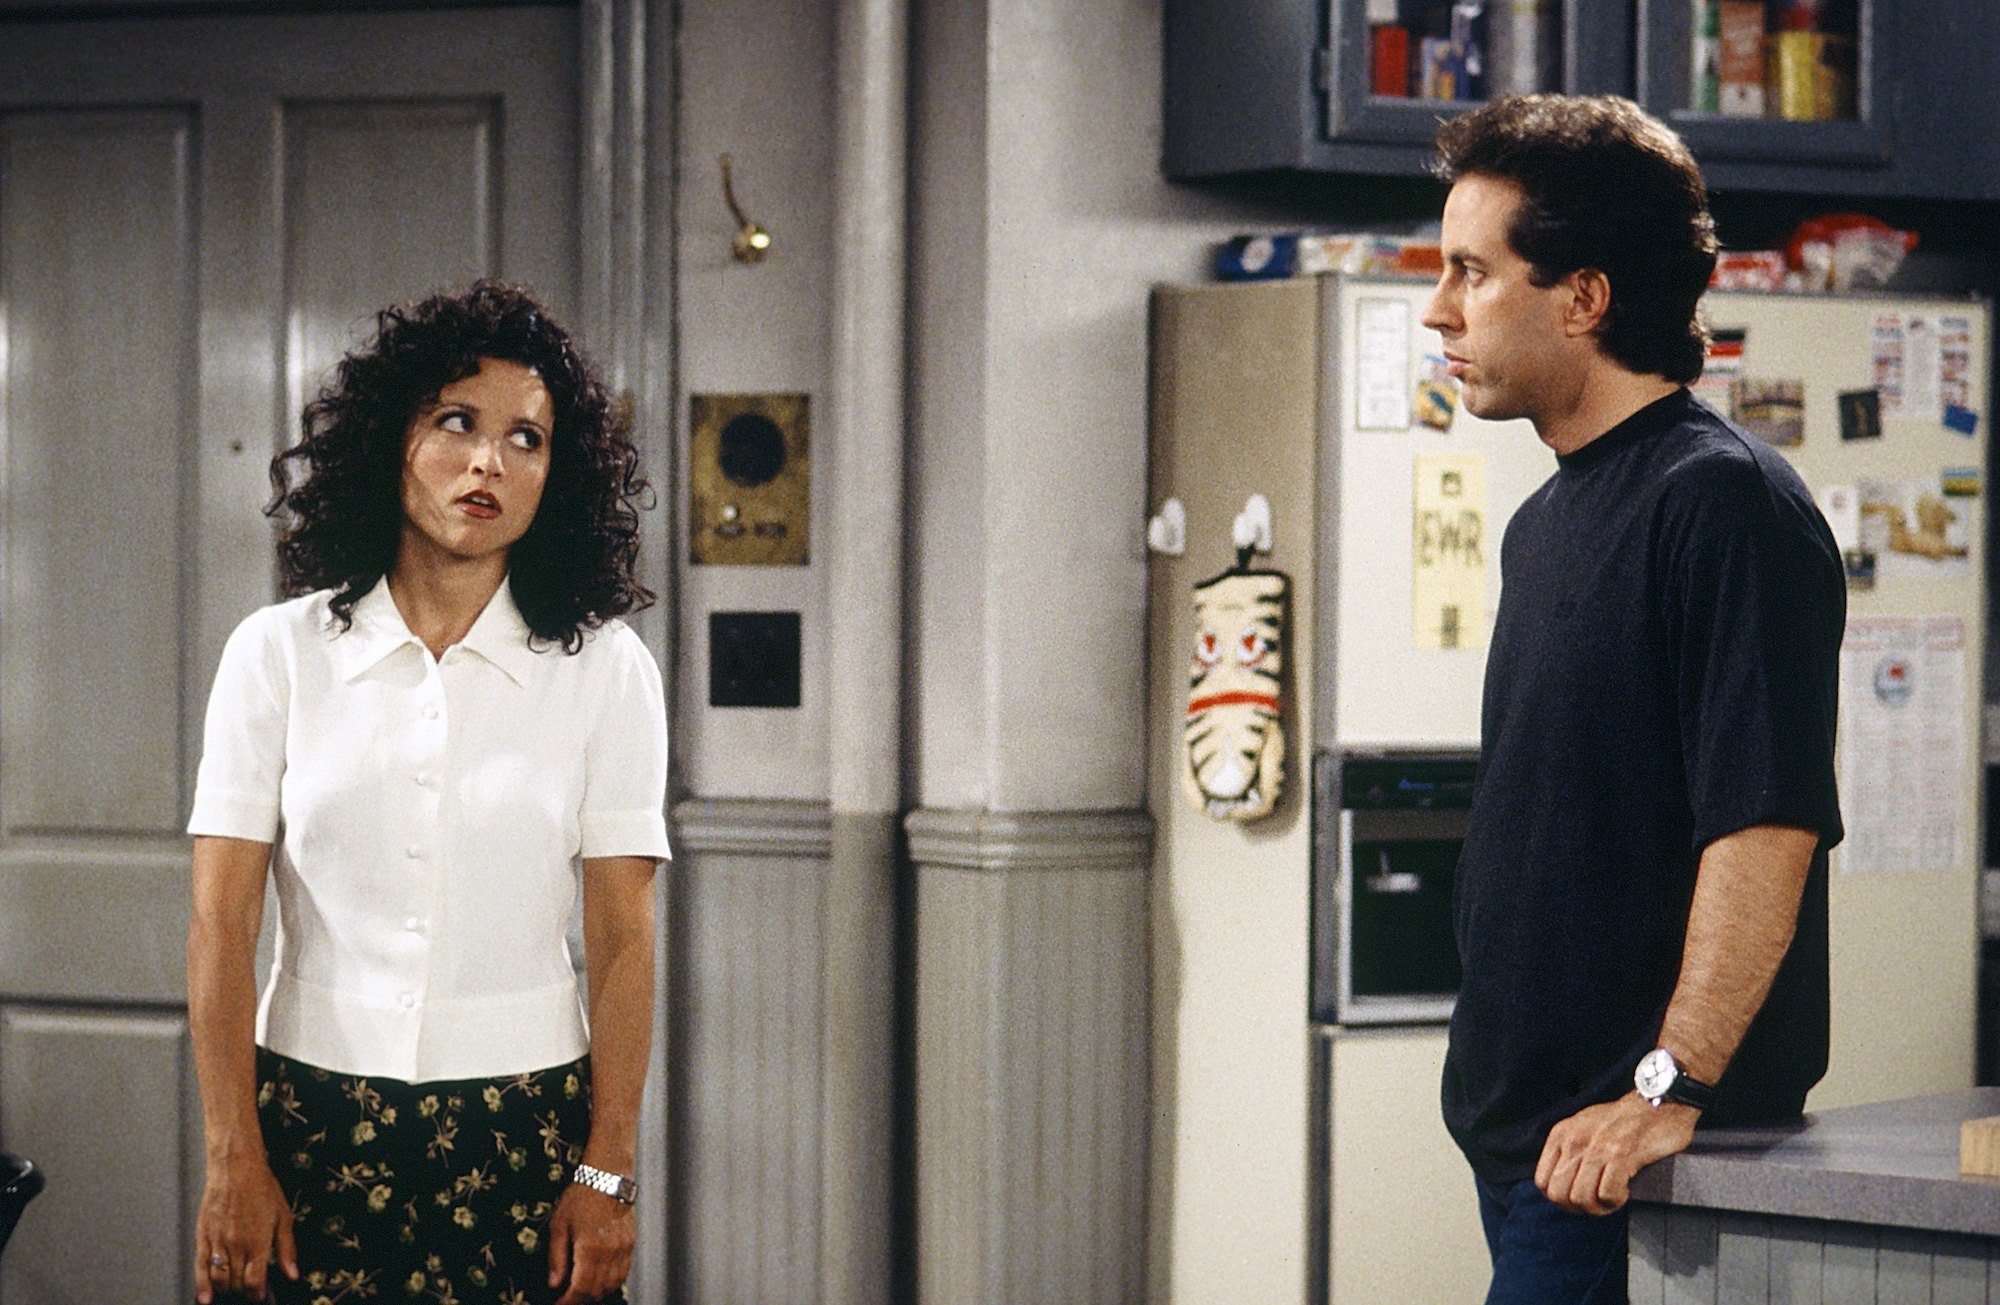 Jerry Seinfeld and Julia Louis-Dreyfus stand in his kitchen